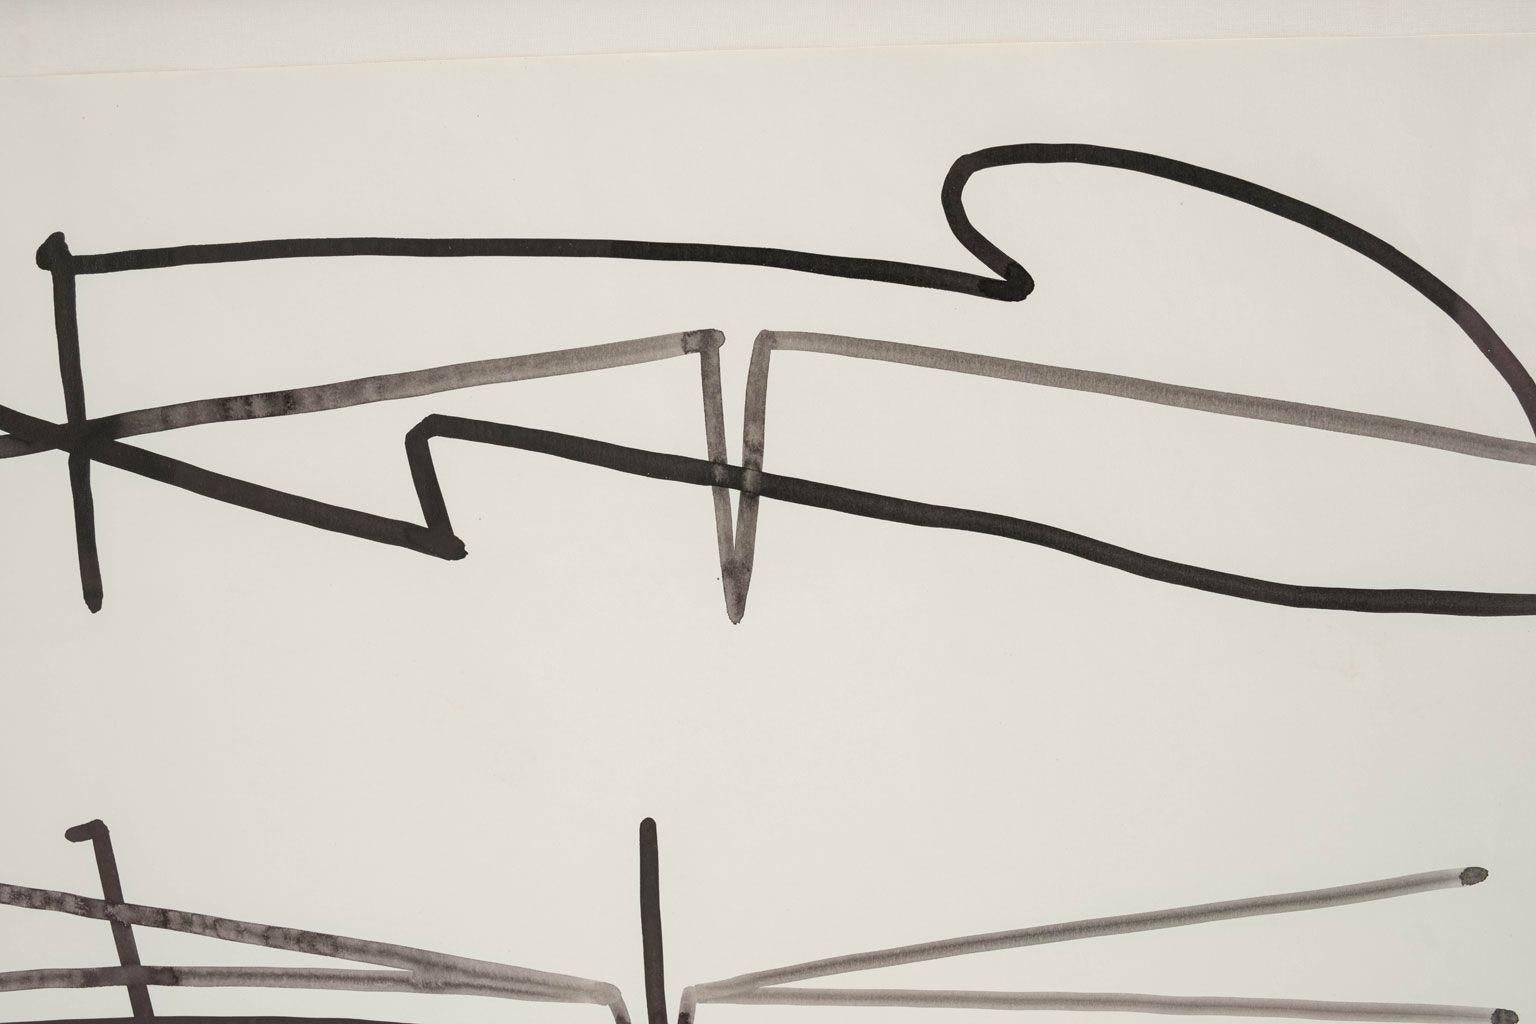 Late 20th Century Minimal Black-and-White Abstract Ink-on-Paper by Philip Renteria (1973)